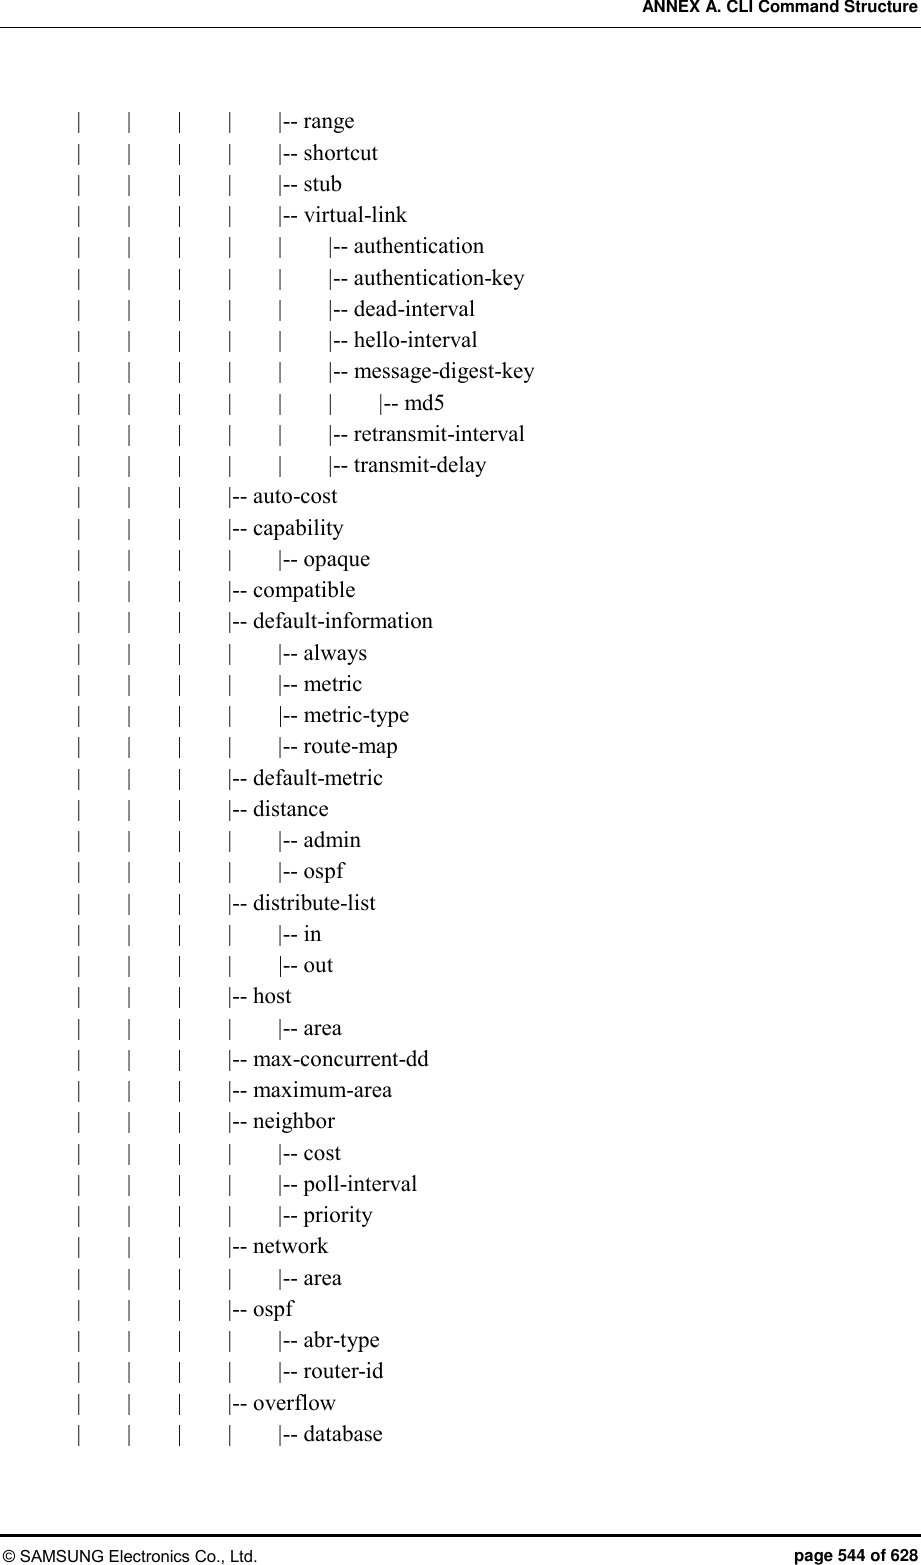 ANNEX A. CLI Command Structure © SAMSUNG Electronics Co., Ltd.  page 544 of 628 |        |        |        |        |-- range |        |        |        |        |-- shortcut |        |        |        |        |-- stub |        |        |        |        |-- virtual-link |        |        |        |        |        |-- authentication |        |        |        |        |        |-- authentication-key |        |        |        |        |        |-- dead-interval |        |        |        |        |        |-- hello-interval |        |        |        |        |        |-- message-digest-key |        |        |        |        |        |        |-- md5 |        |        |        |        |        |-- retransmit-interval |        |        |        |        |        |-- transmit-delay |        |        |        |-- auto-cost |        |        |        |-- capability |        |        |        |        |-- opaque |        |        |        |-- compatible |        |        |        |-- default-information |        |        |        |        |-- always |        |        |        |        |-- metric |        |        |        |     |-- metric-type |        |        |        |        |-- route-map |        |        |        |-- default-metric |        |        |        |-- distance |        |        |        |        |-- admin |        |        |        |        |-- ospf |        |        |        |-- distribute-list |        |        |        |        |-- in |        |        |        |        |-- out |        |        |        |-- host |        |        |        |        |-- area |        |        |        |-- max-concurrent-dd |        |        |        |-- maximum-area |        |        |        |-- neighbor |        |        |        |        |-- cost |        |        |        |        |-- poll-interval |        |        |        |        |-- priority |        |        |        |-- network |        |        |        |        |-- area |        |        |        |-- ospf |        |        |        |        |-- abr-type |        |        |        |        |-- router-id |        |        |        |-- overflow |        |        |        |        |-- database 